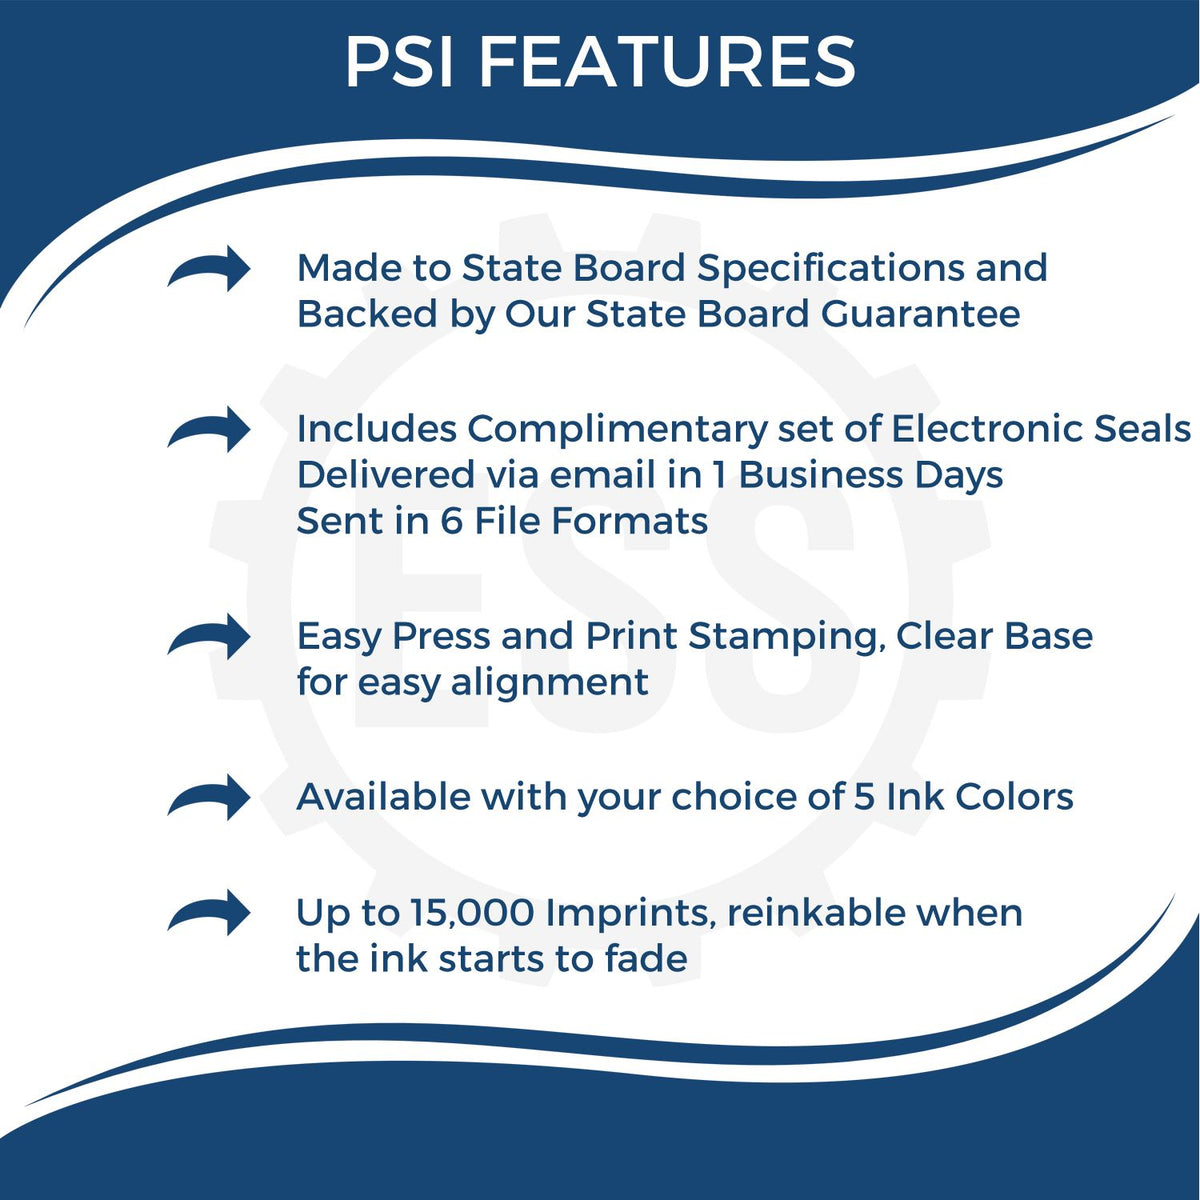 A picture of an infographic highlighting the selling points for the PSI South Dakota Notary Stamp